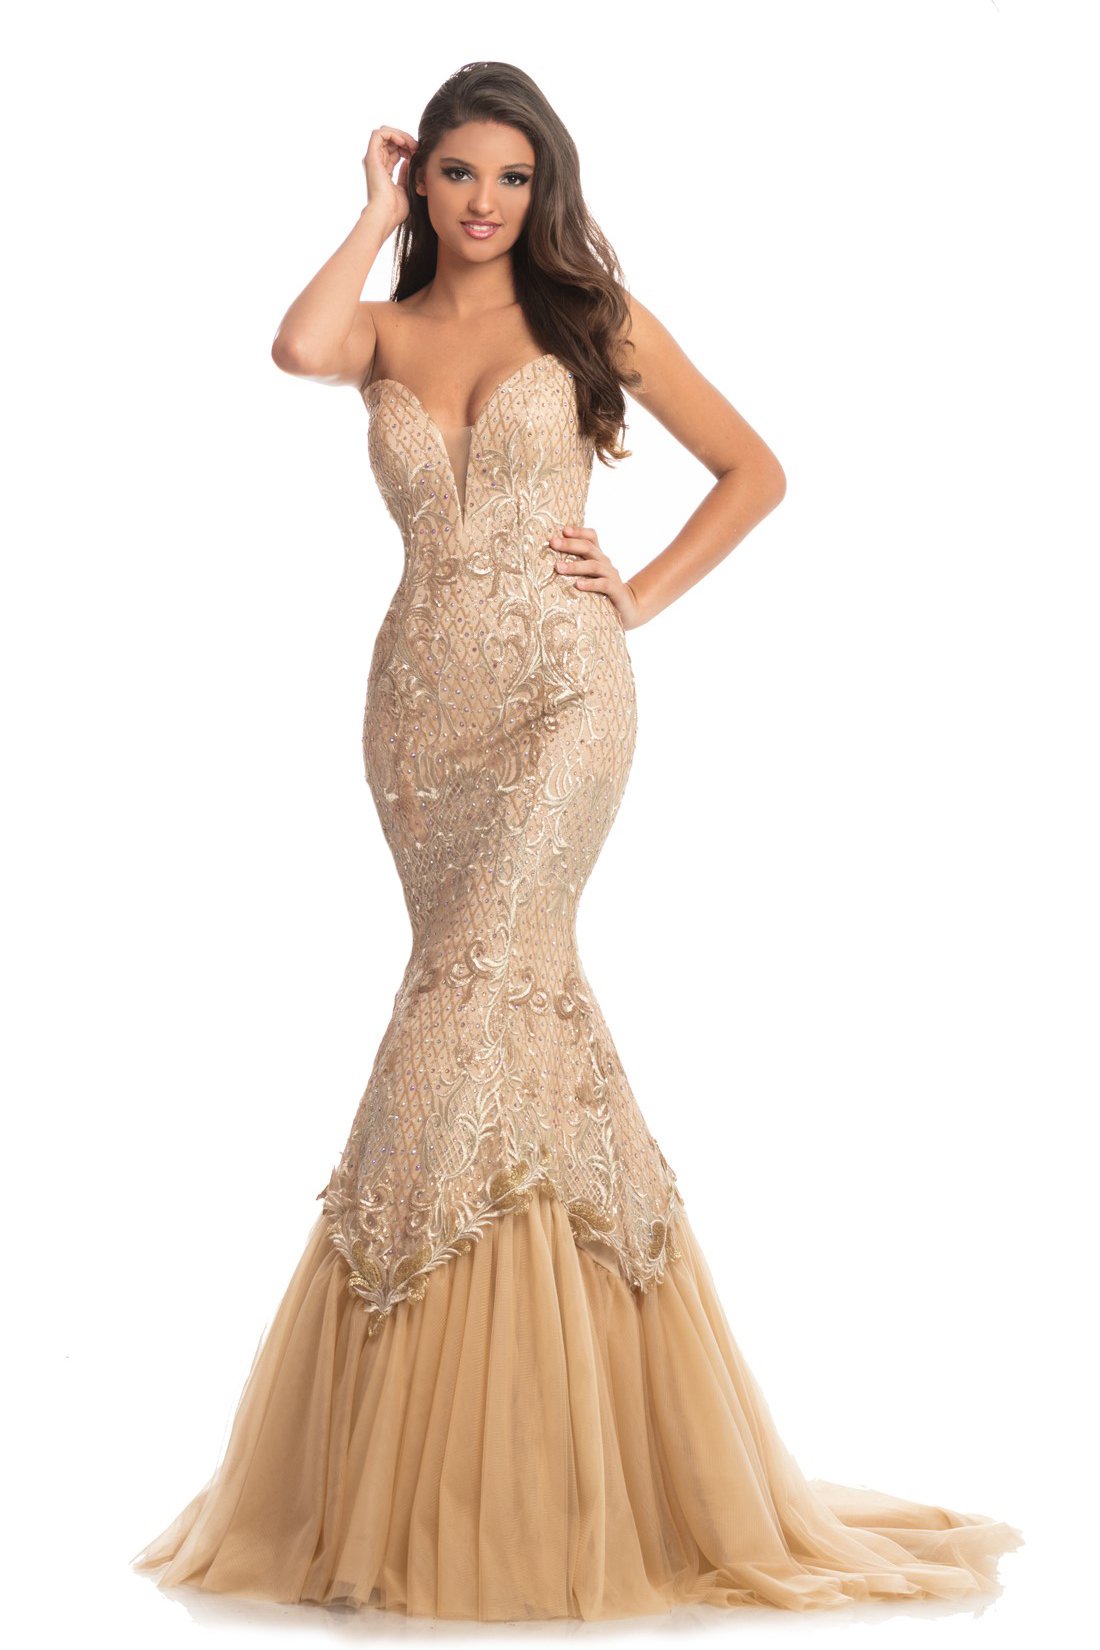 Johnathan Kayne 9001 is a Mermaid Prom Dress, Pageant Gown & Formal Evening Wear. This Classic mermaid gown with V-neck sweetheart bodice designed by Johnathan Kayne. 